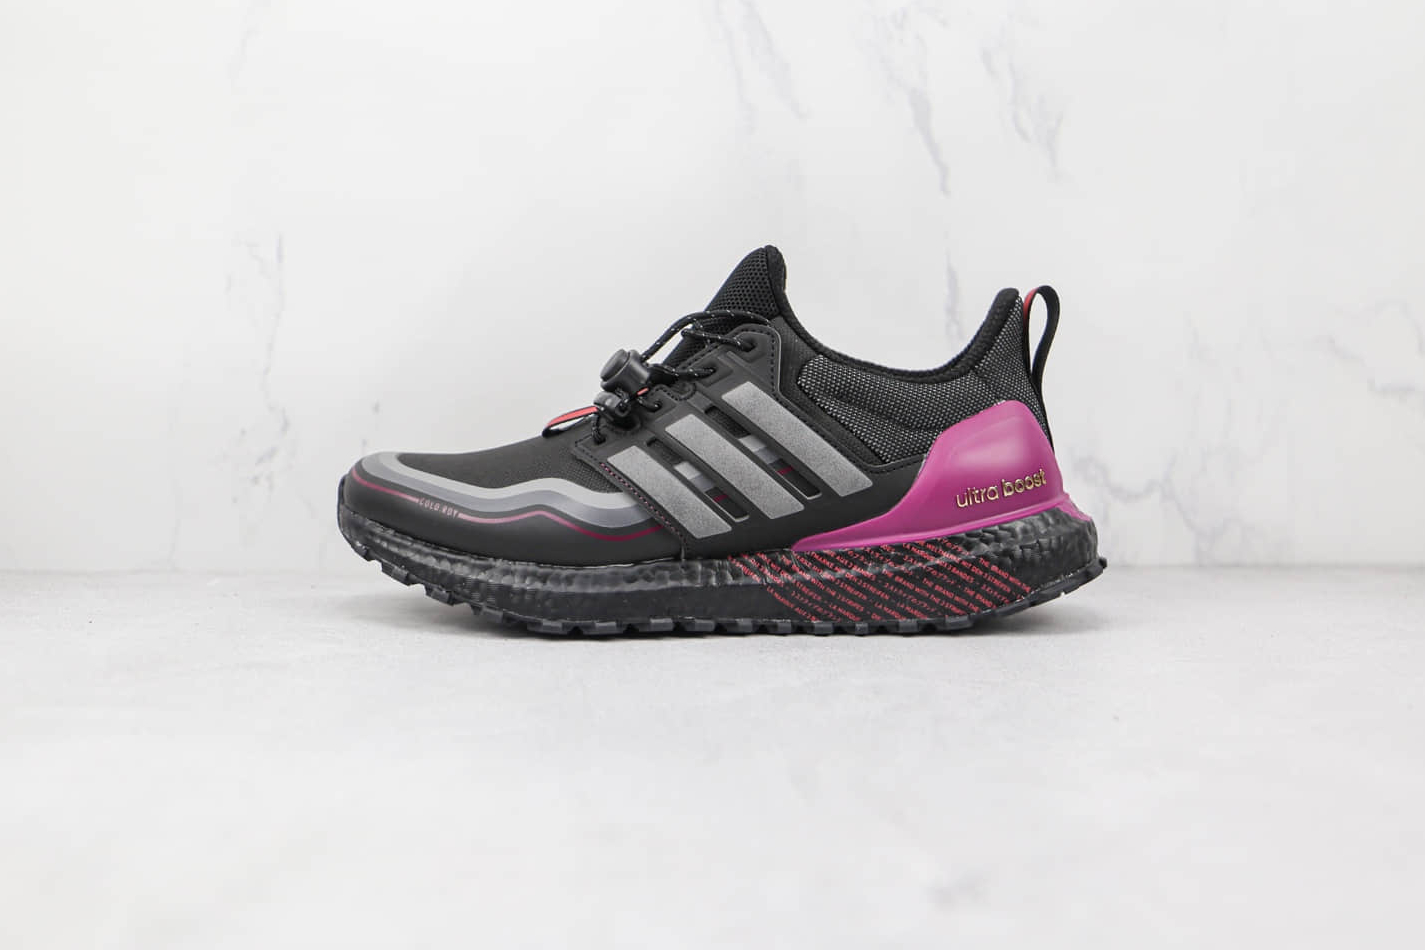 Adidas UltraBoost Cold.RDY DNA 'Black Purple' G54861 - Stylish Performance Footwear for All-Day Comfort